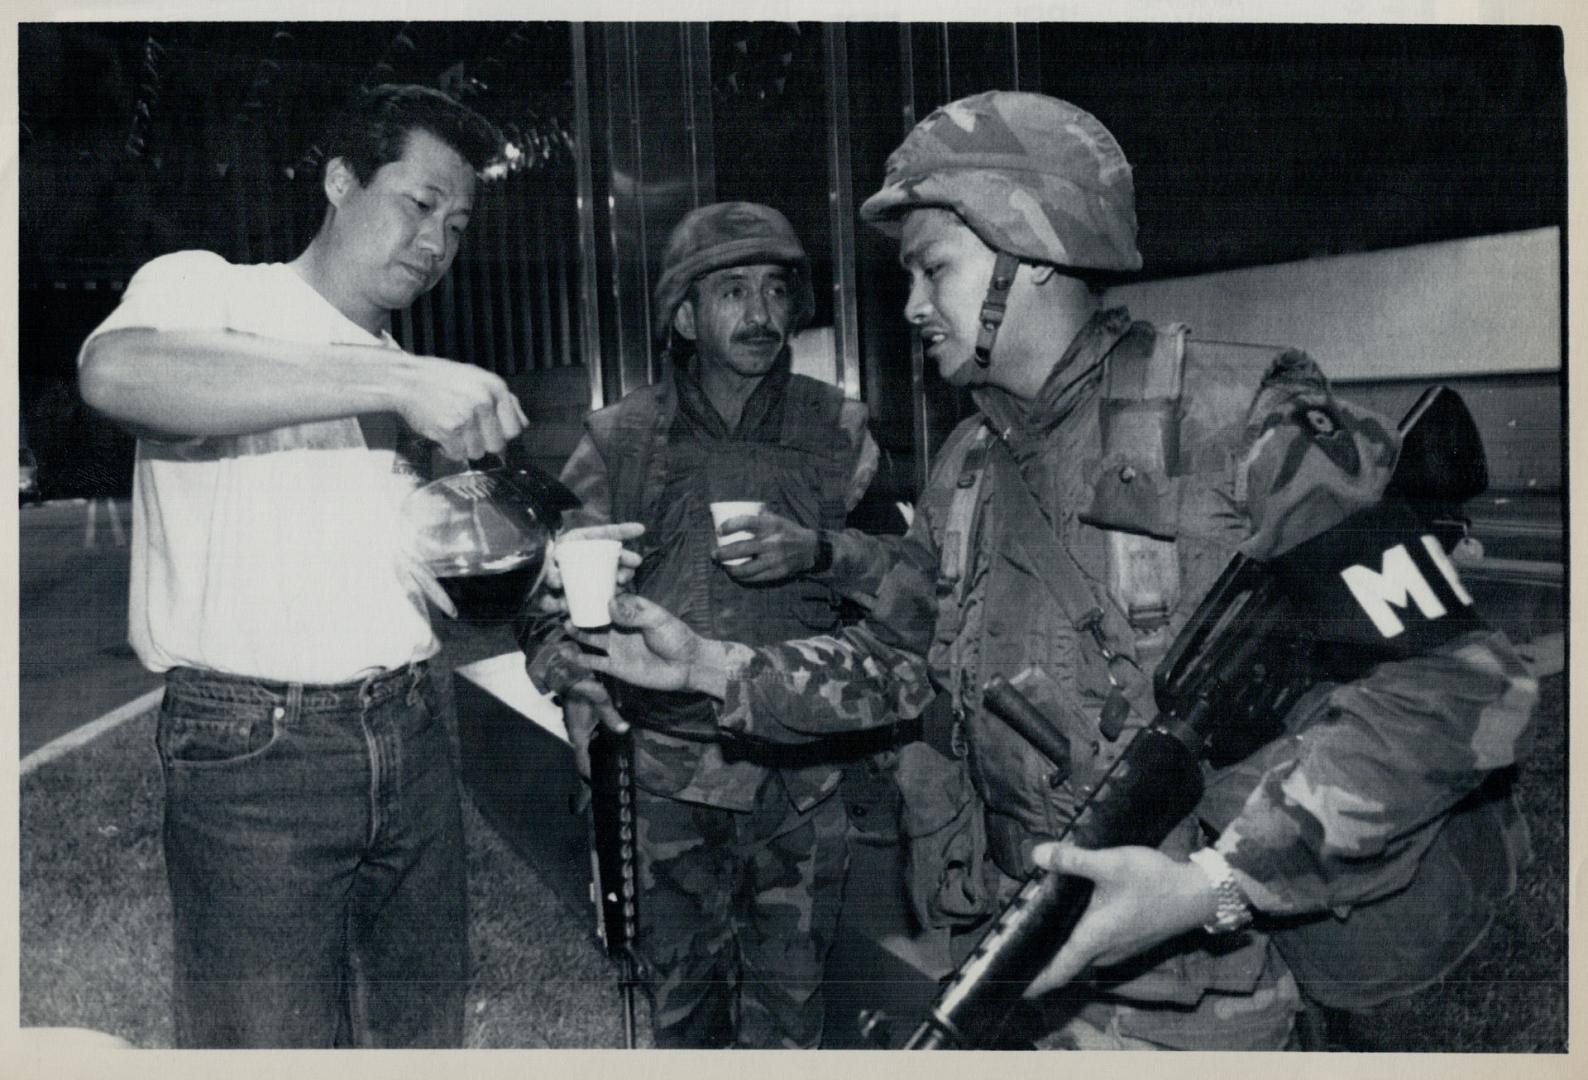 Coffee break: David Jang, an employee of a Los Angeles car dealership, serves coffee in the pre-dawn darkness today to two National Guardsmen guarding the business from looters